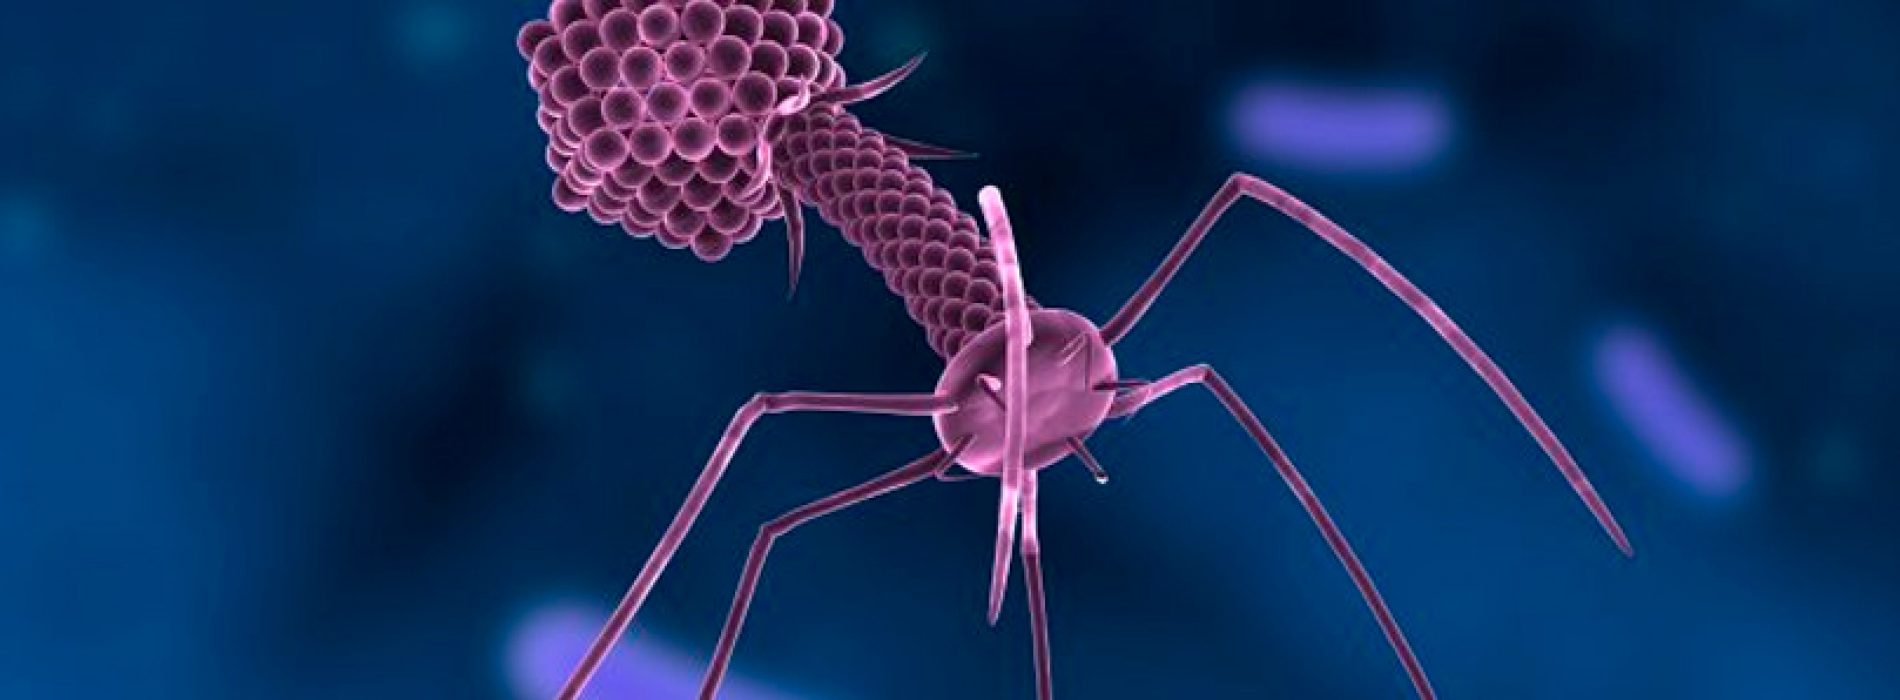 The American Agency FDA approves clinical trial with Bacteriophage